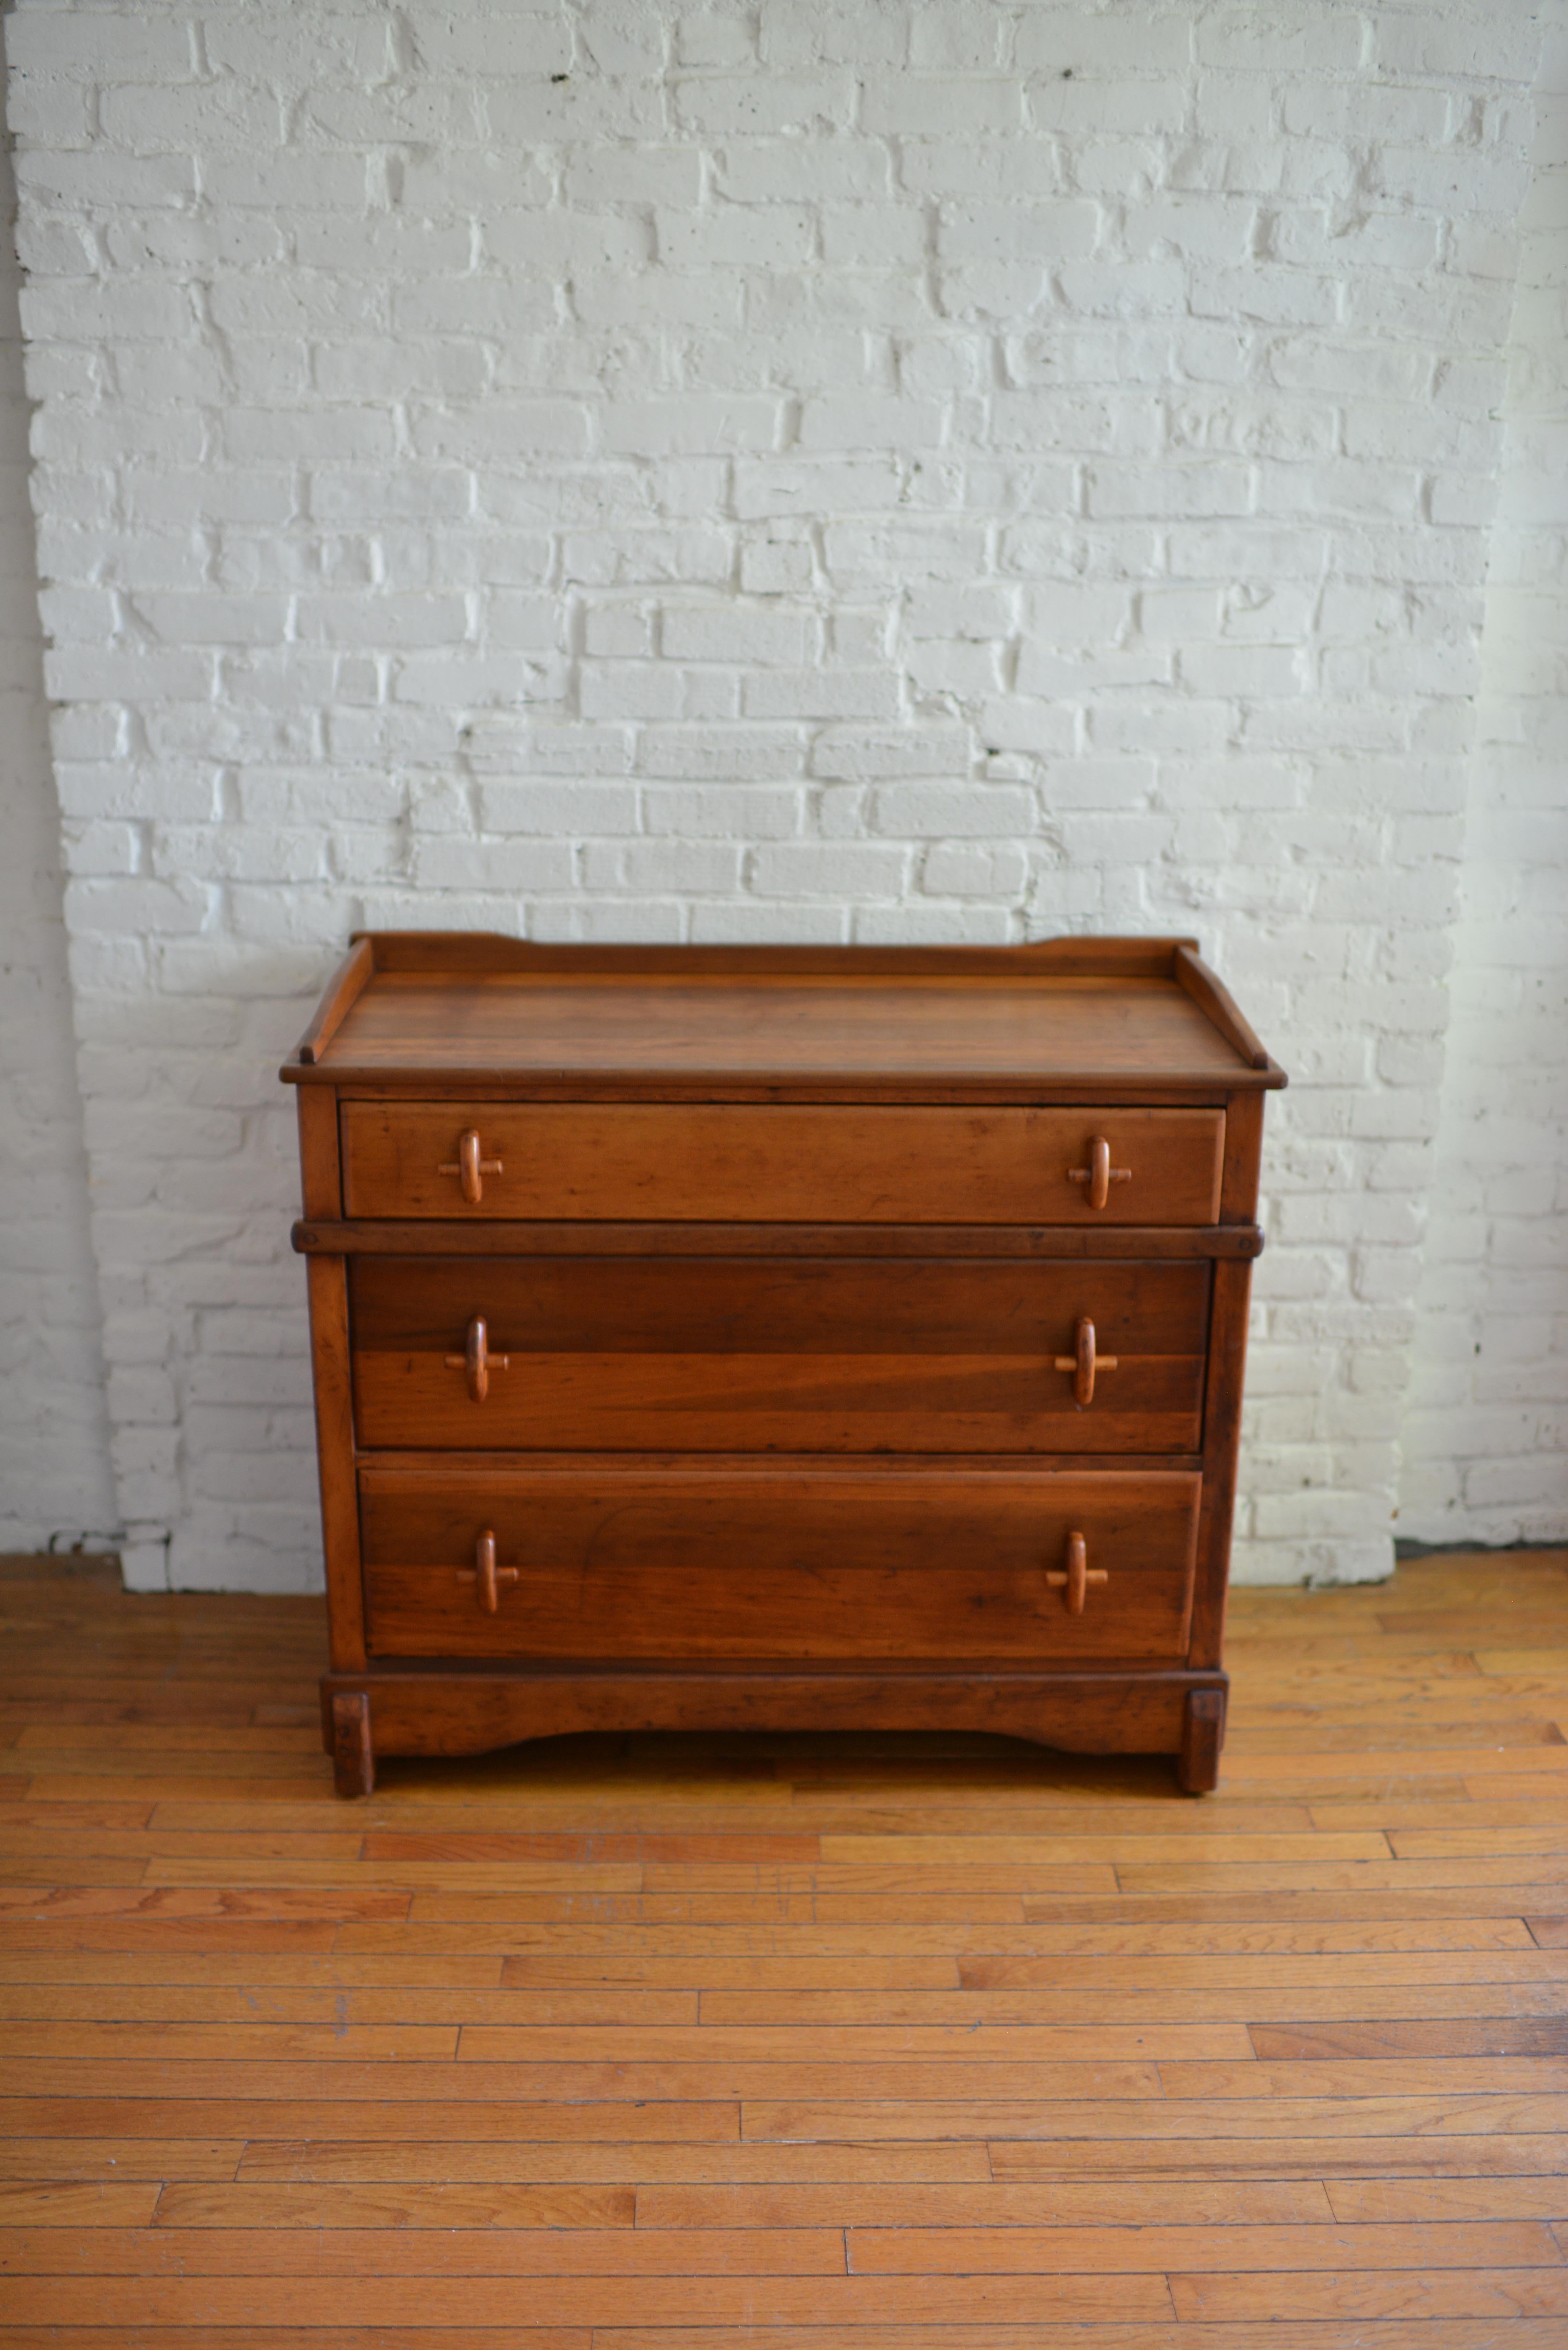 Rustic Antique Chest of Drawers with Cross Handle Pulls